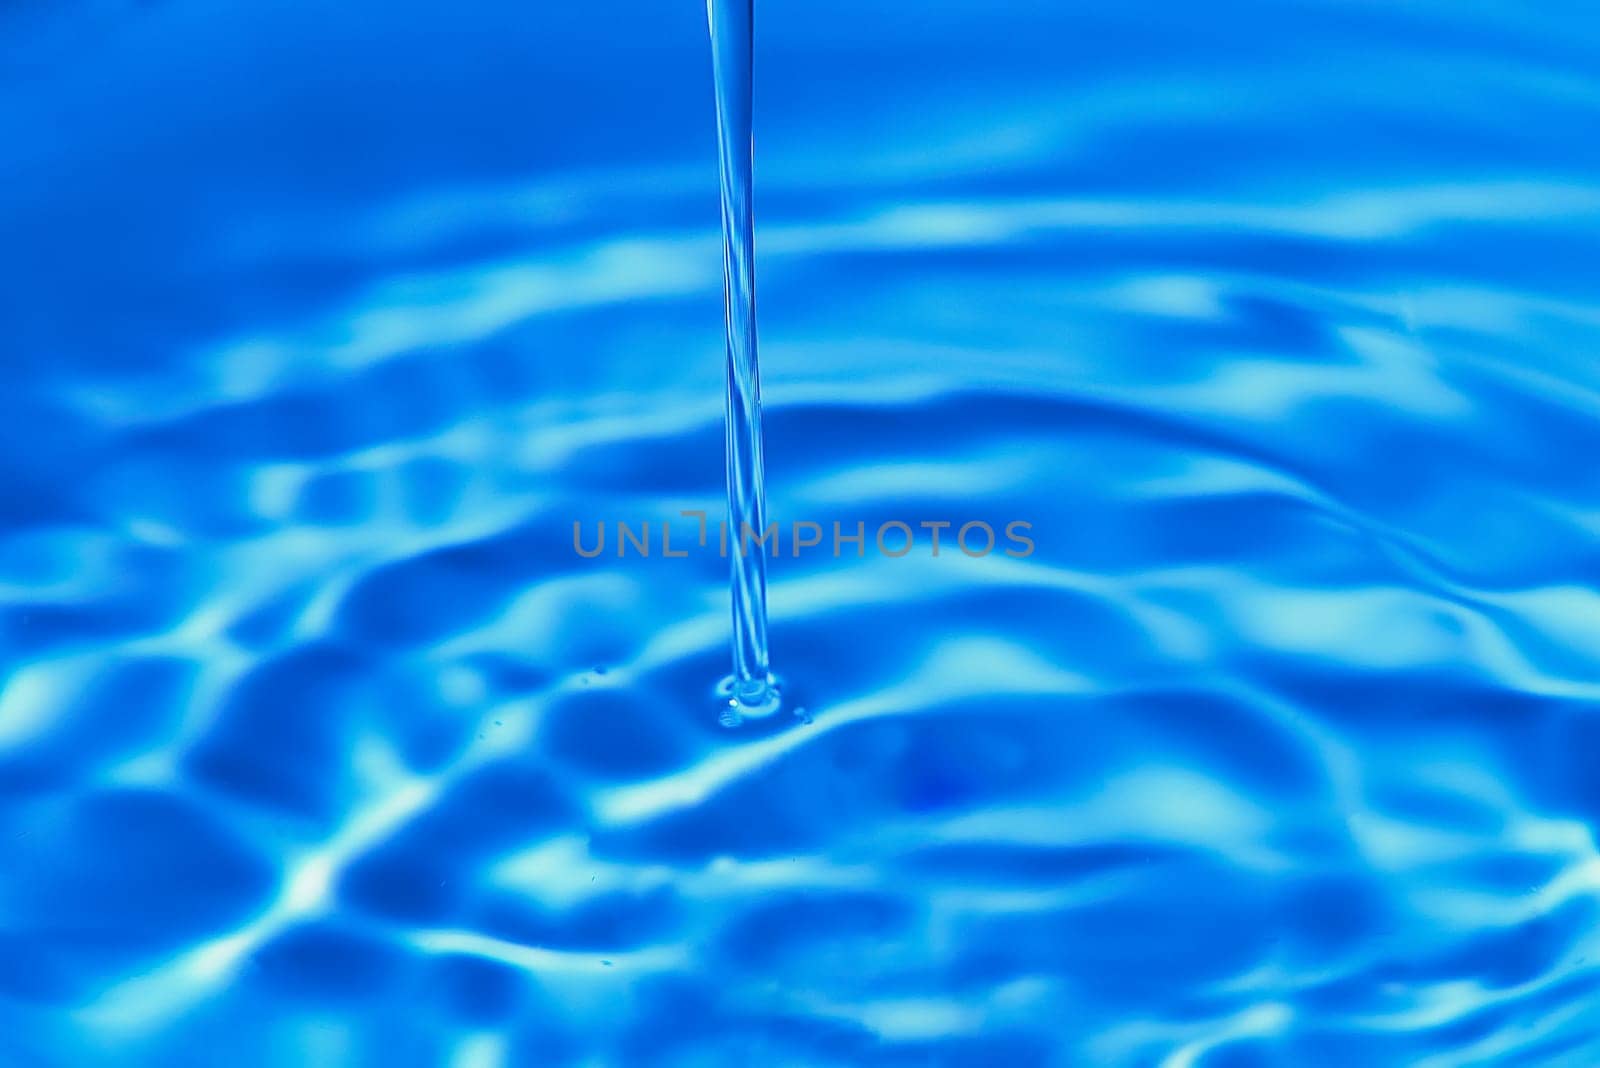 122.One or more drops of water splashing into waves and undefined shapes. Wallpaper by raul_ruiz